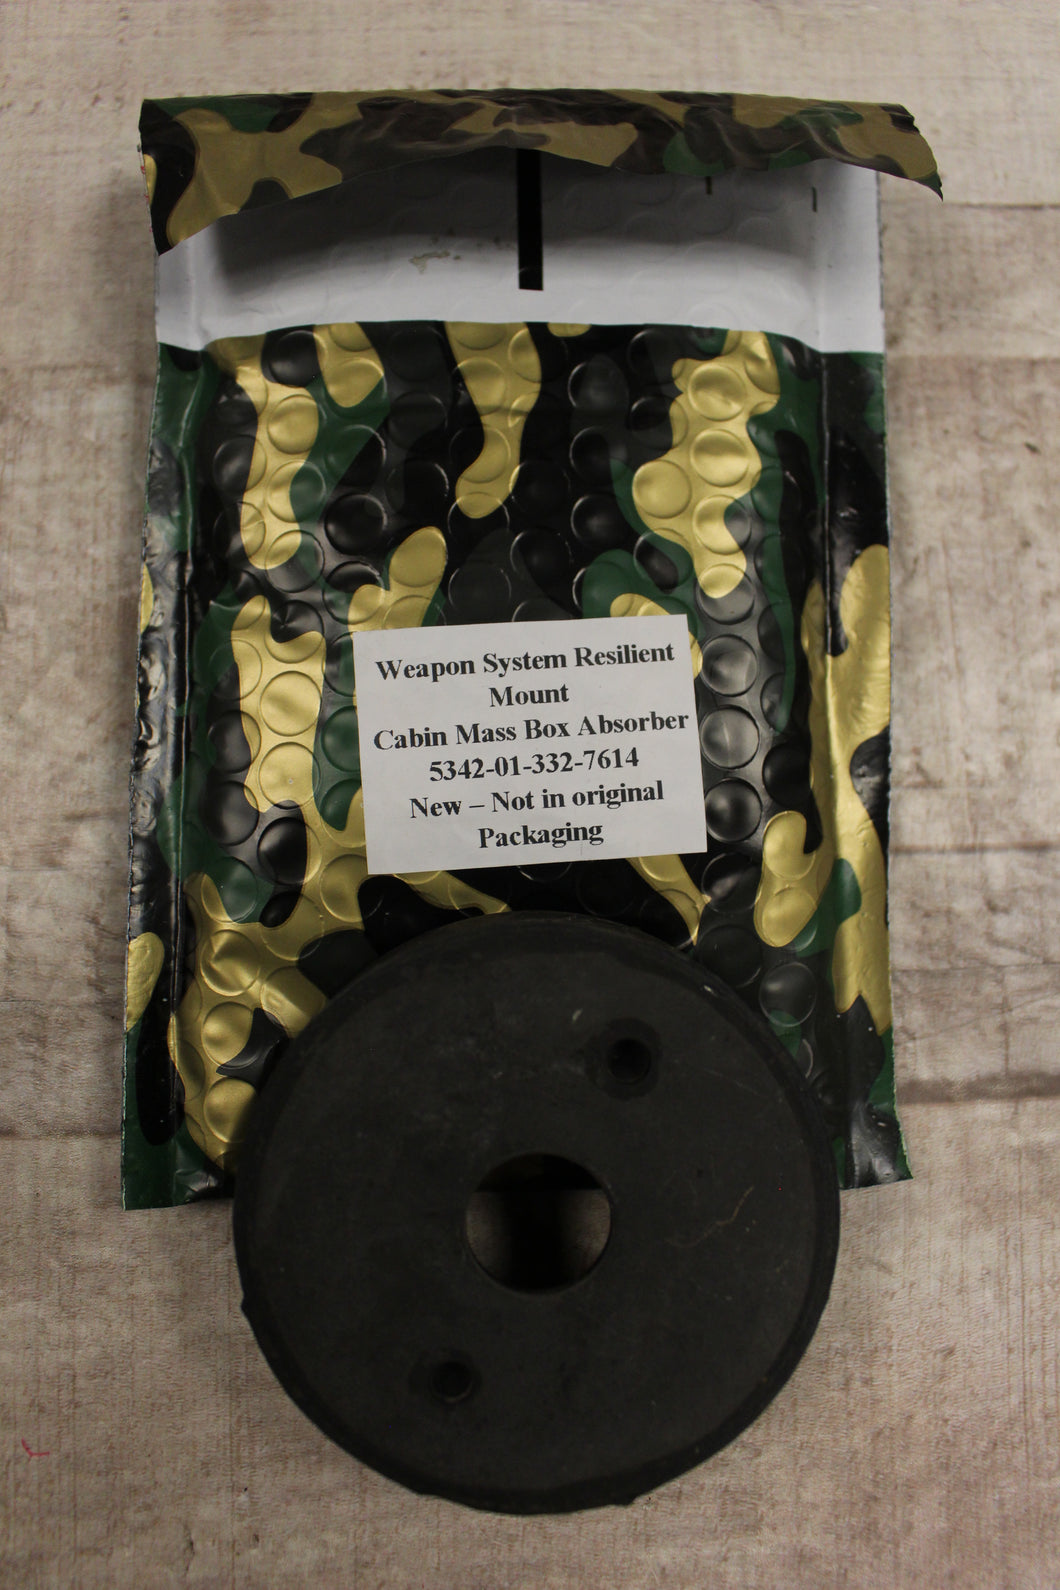 Weapon System Resilient Mount Cabin Mass Box Absorber - 5342-01-332-7614 - New